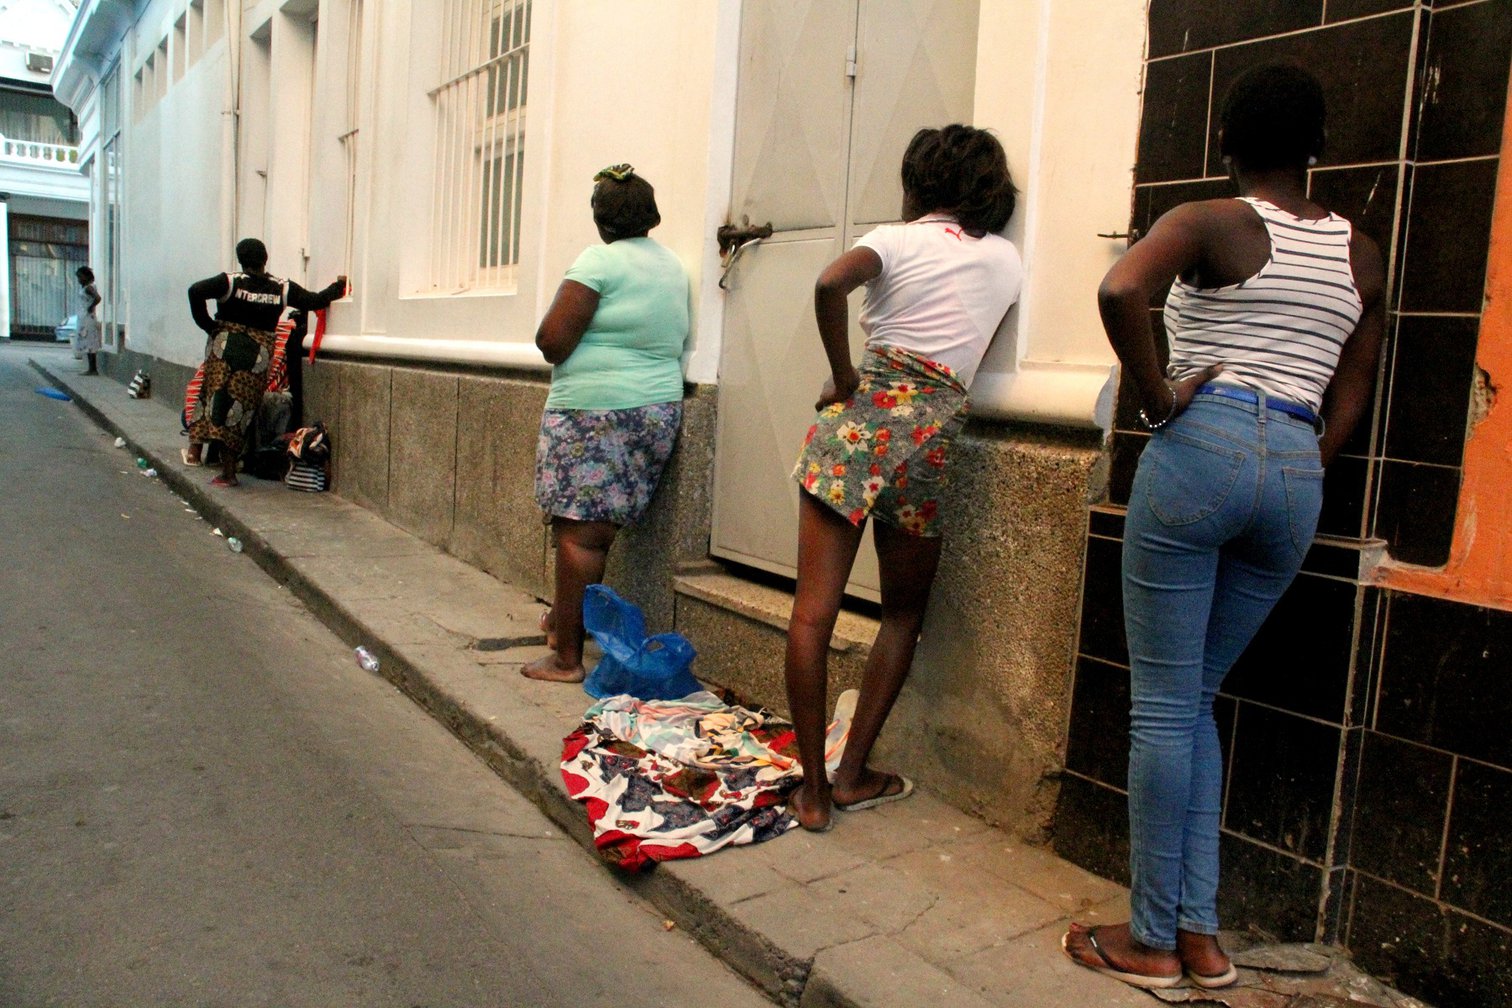  Buy Whores in Maputo,Mozambique